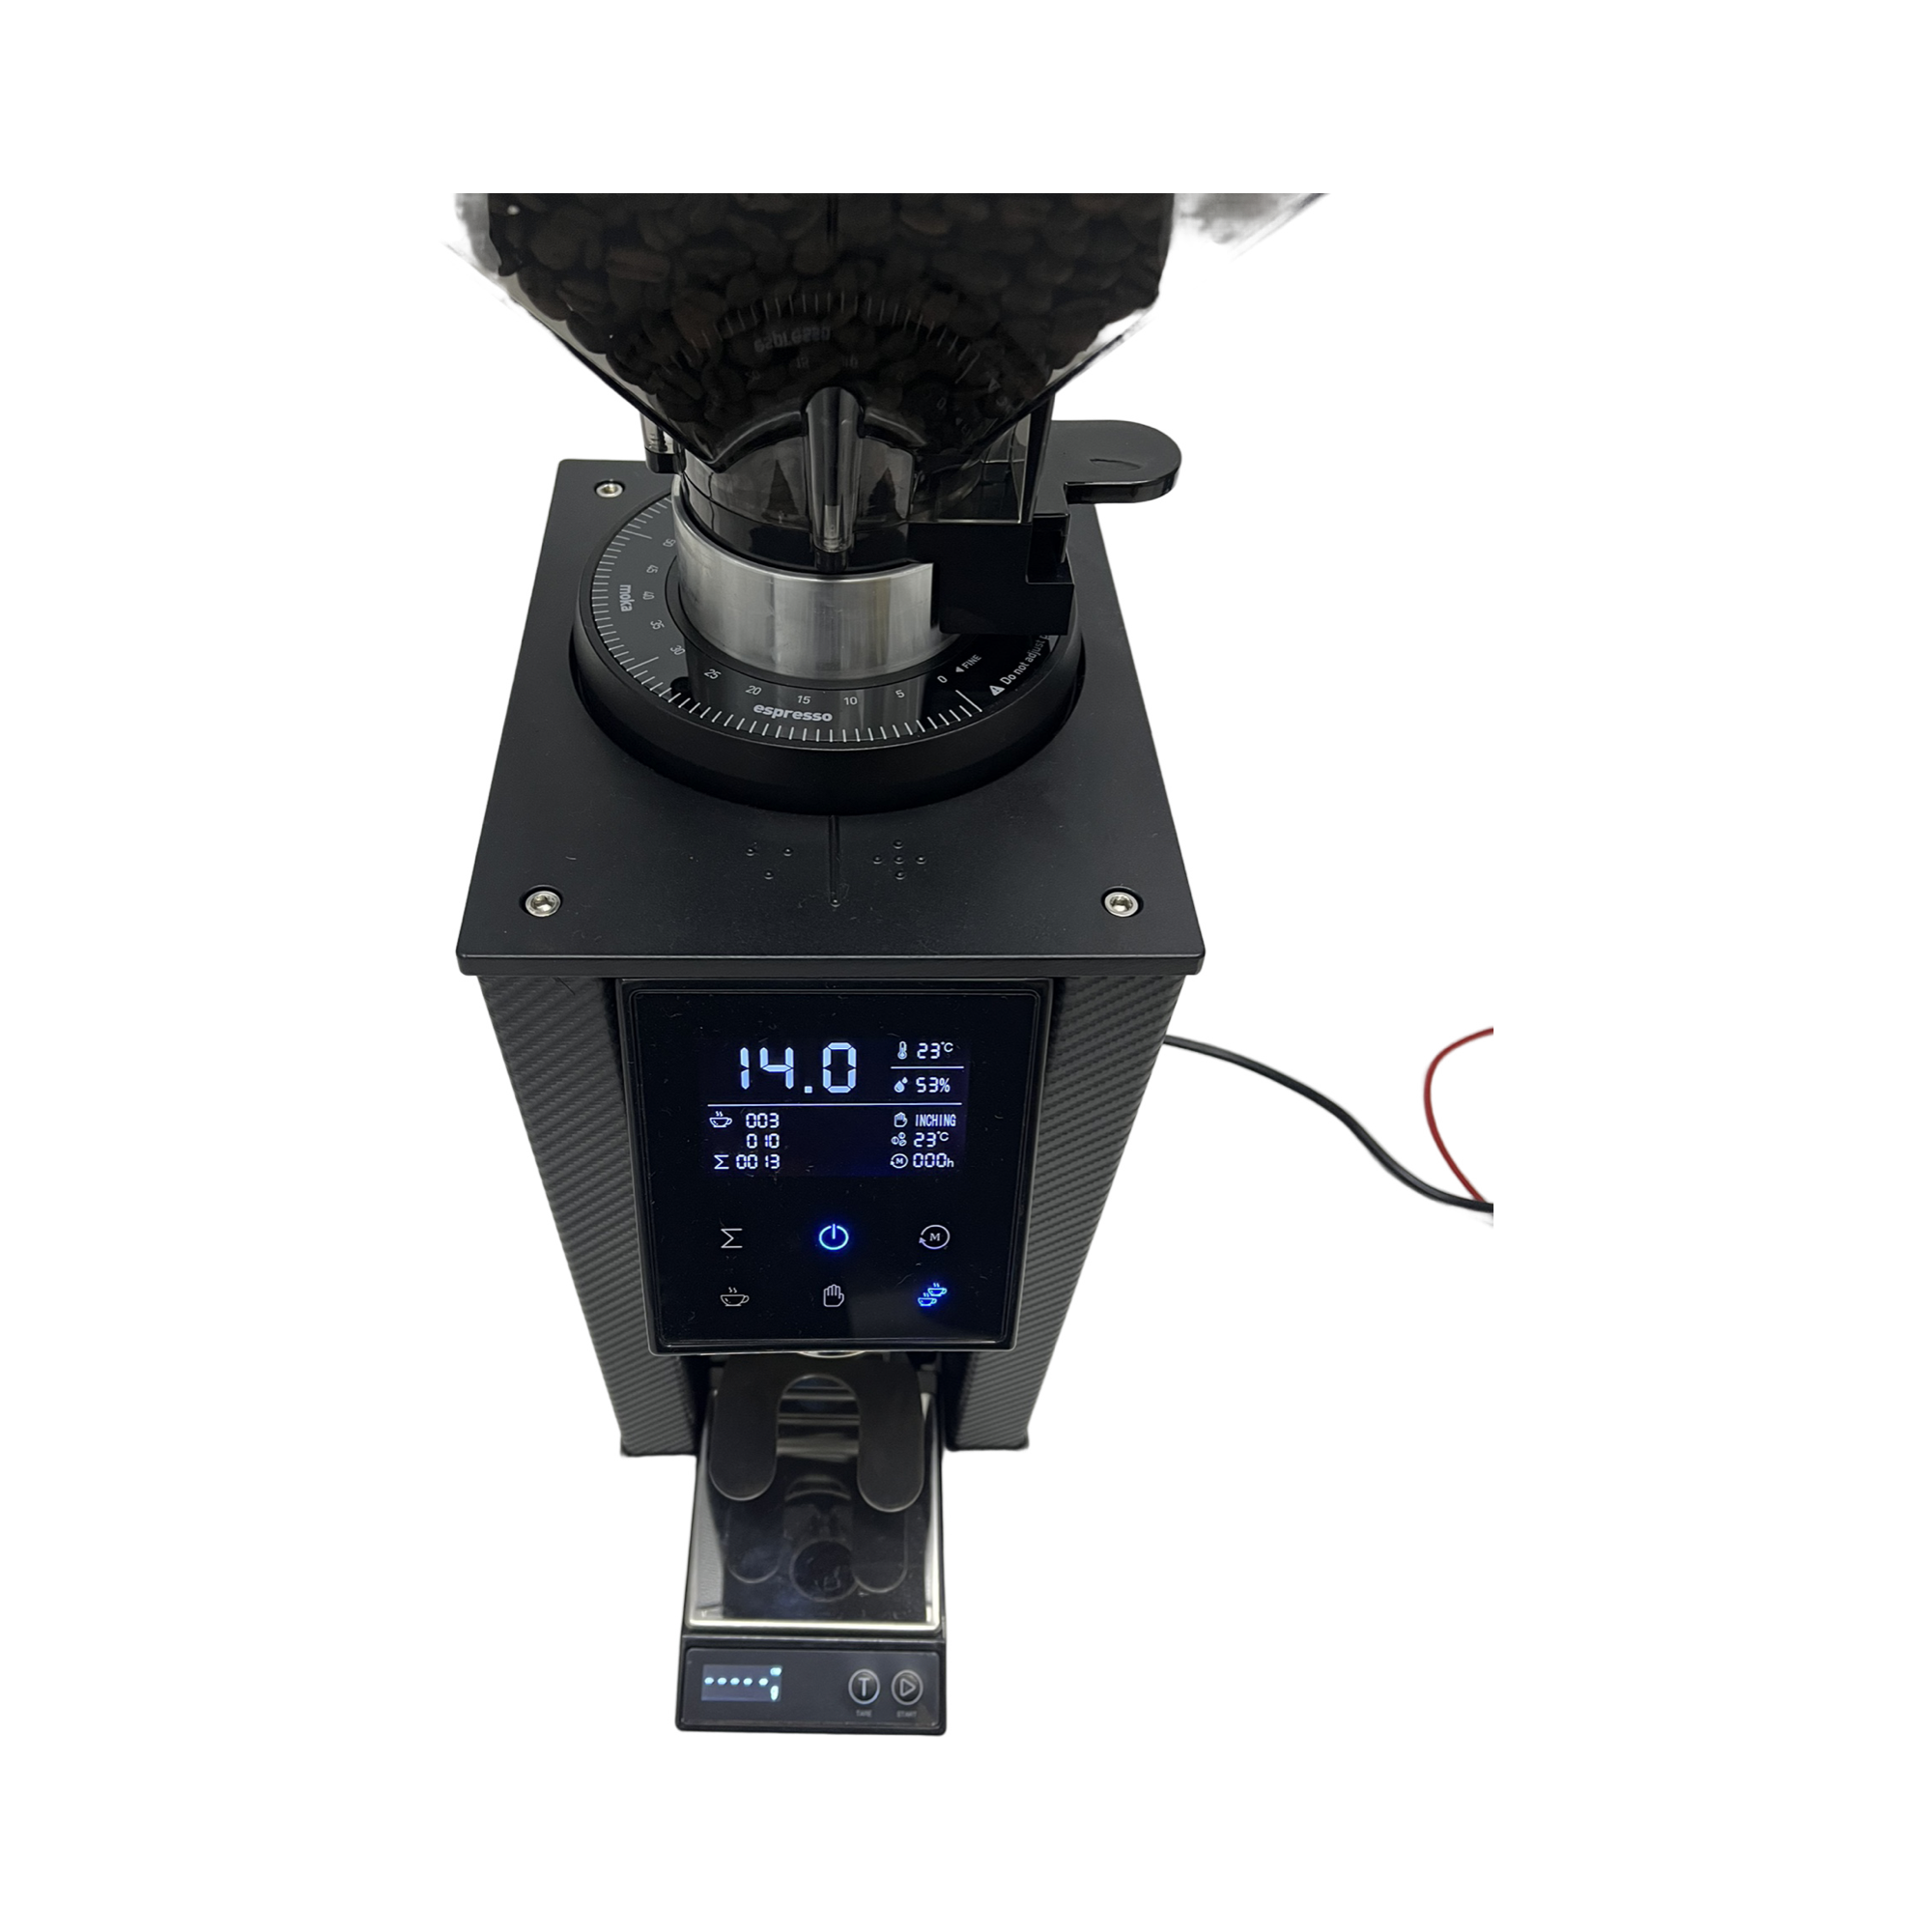 ZF64W Grind by Weight & Time (Limited $799 price for the next 50 units)